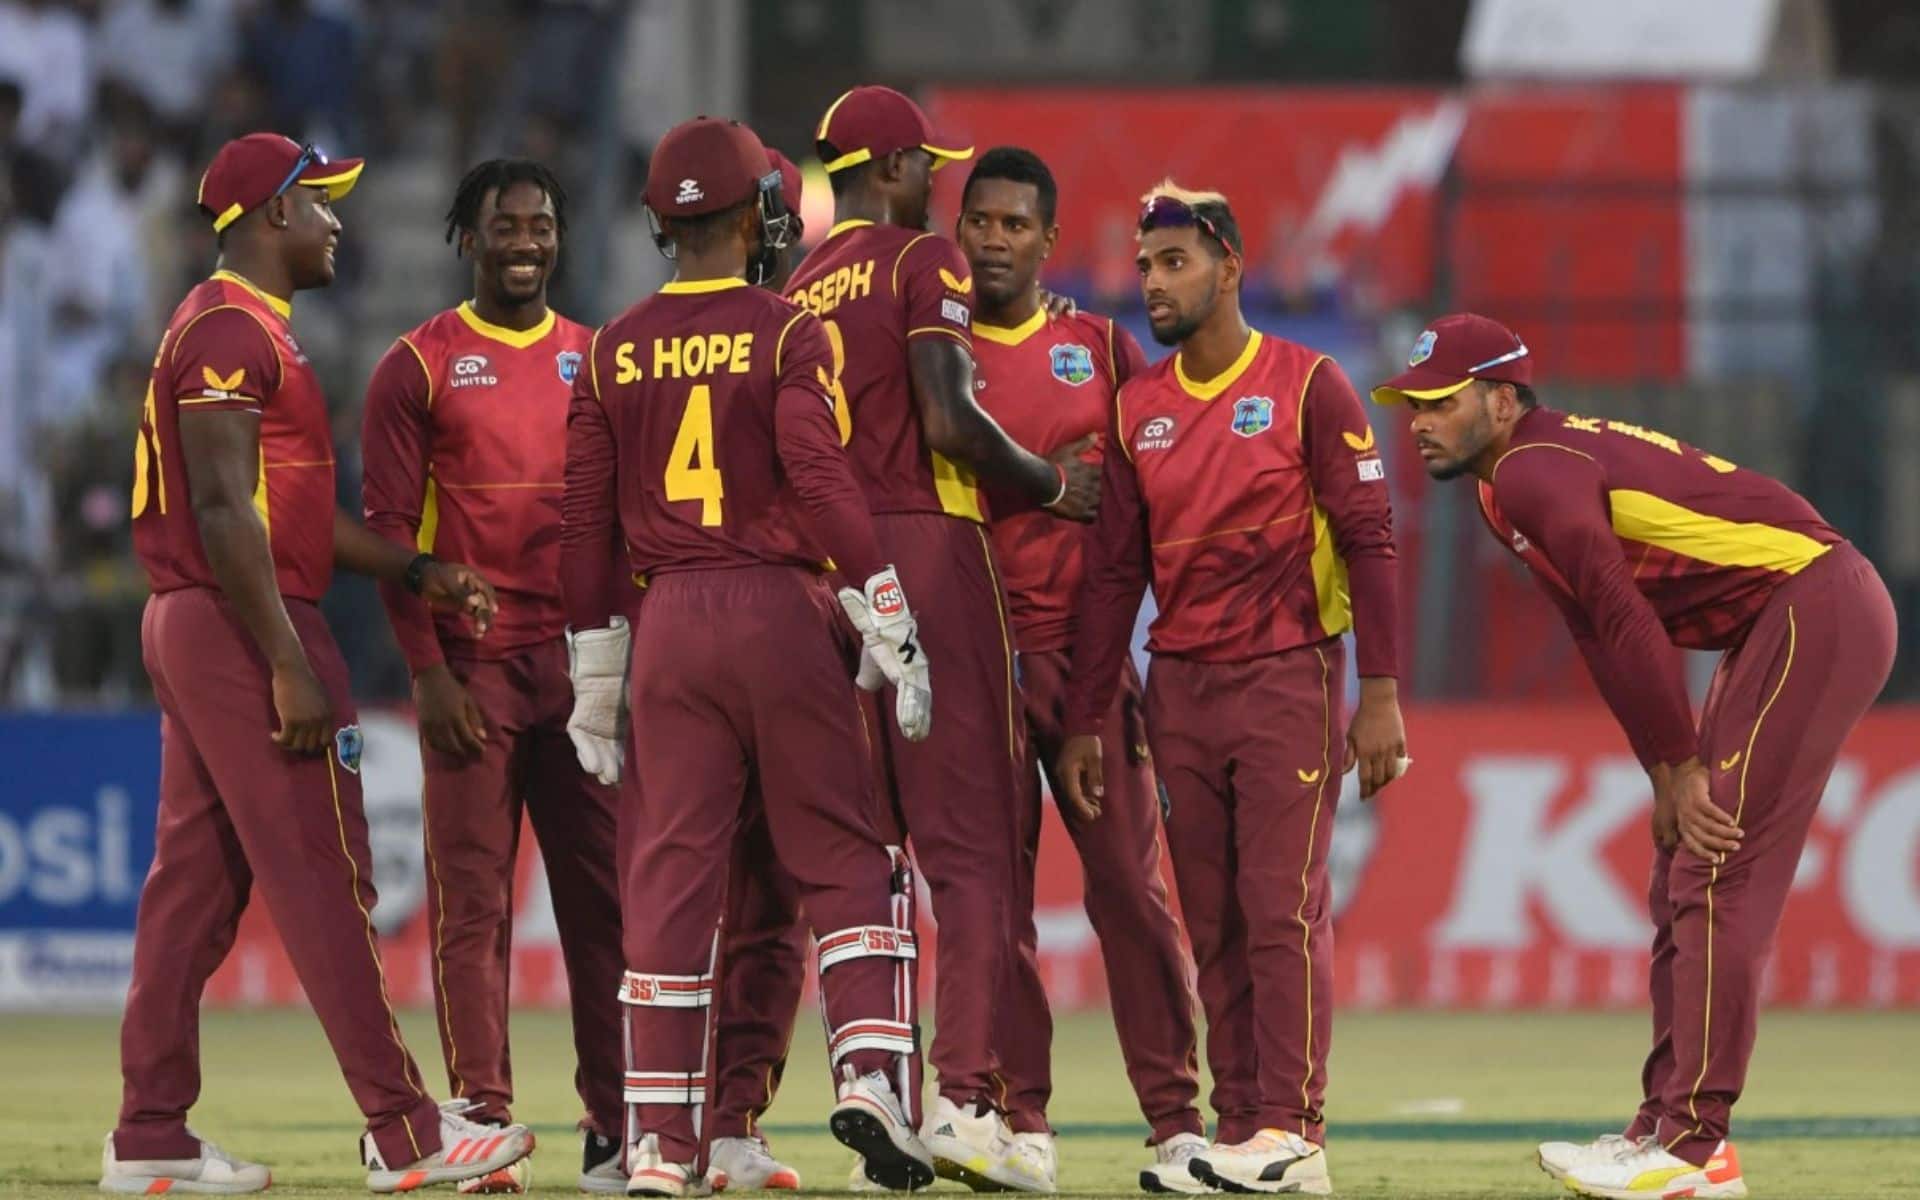 West Indies will aim to win their third T20 World Cup title at home (Twitter)